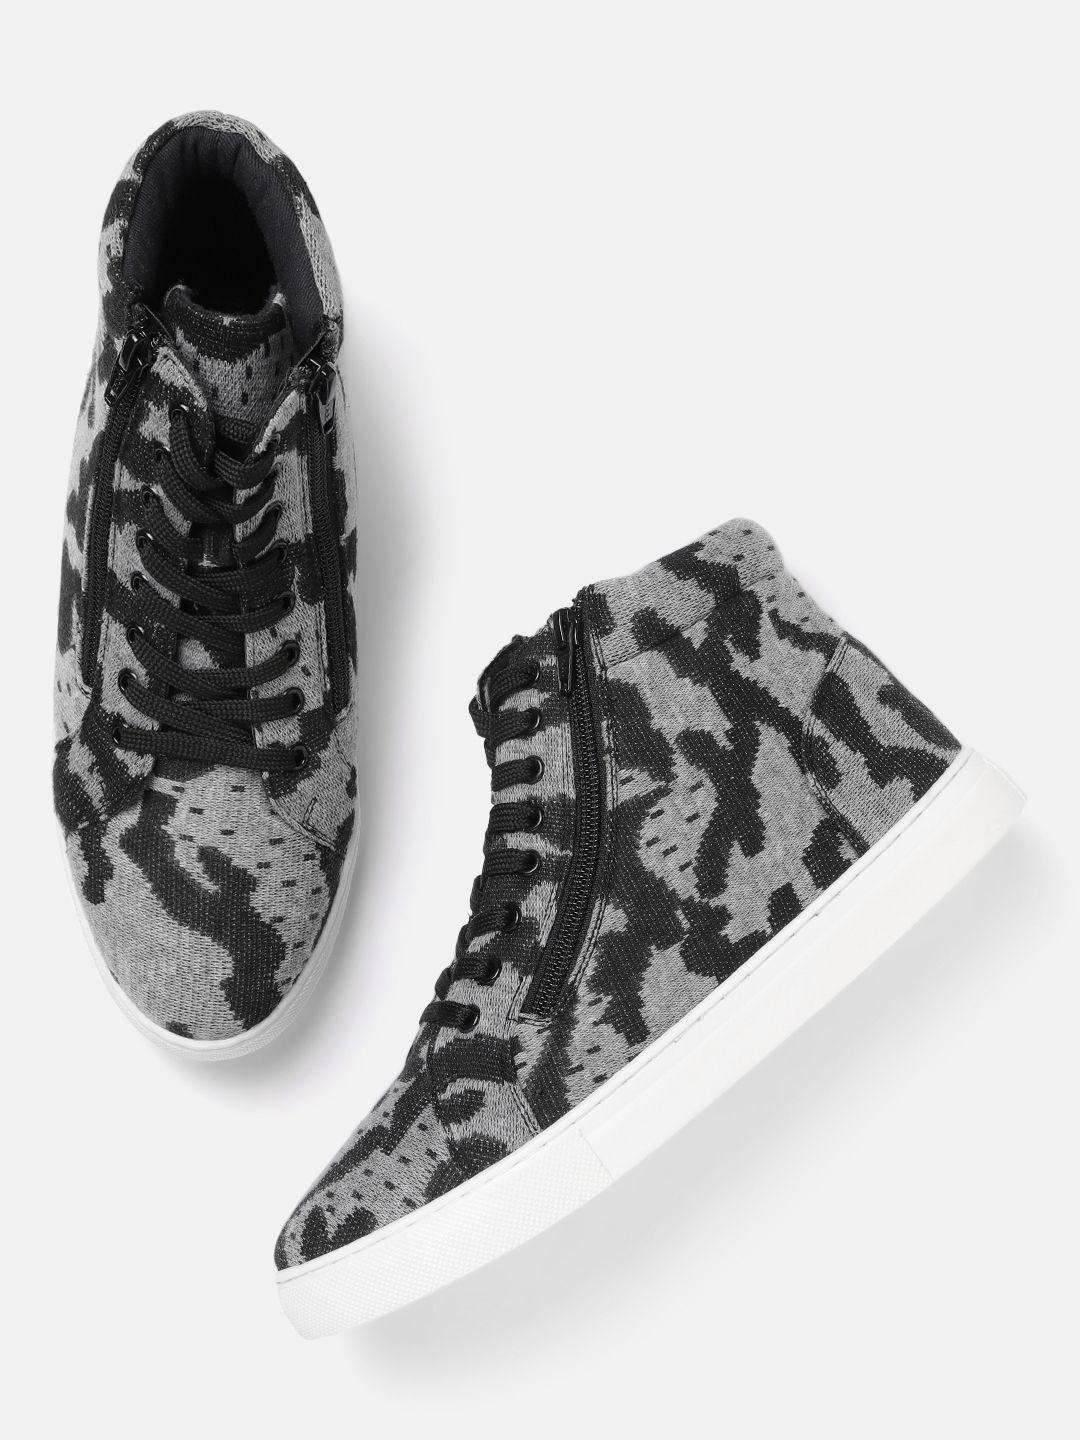 The Roadster Lifestyle Co Women Grey Melange & Black Mid-Top Camouflage Woven Design Sneakers Price in India